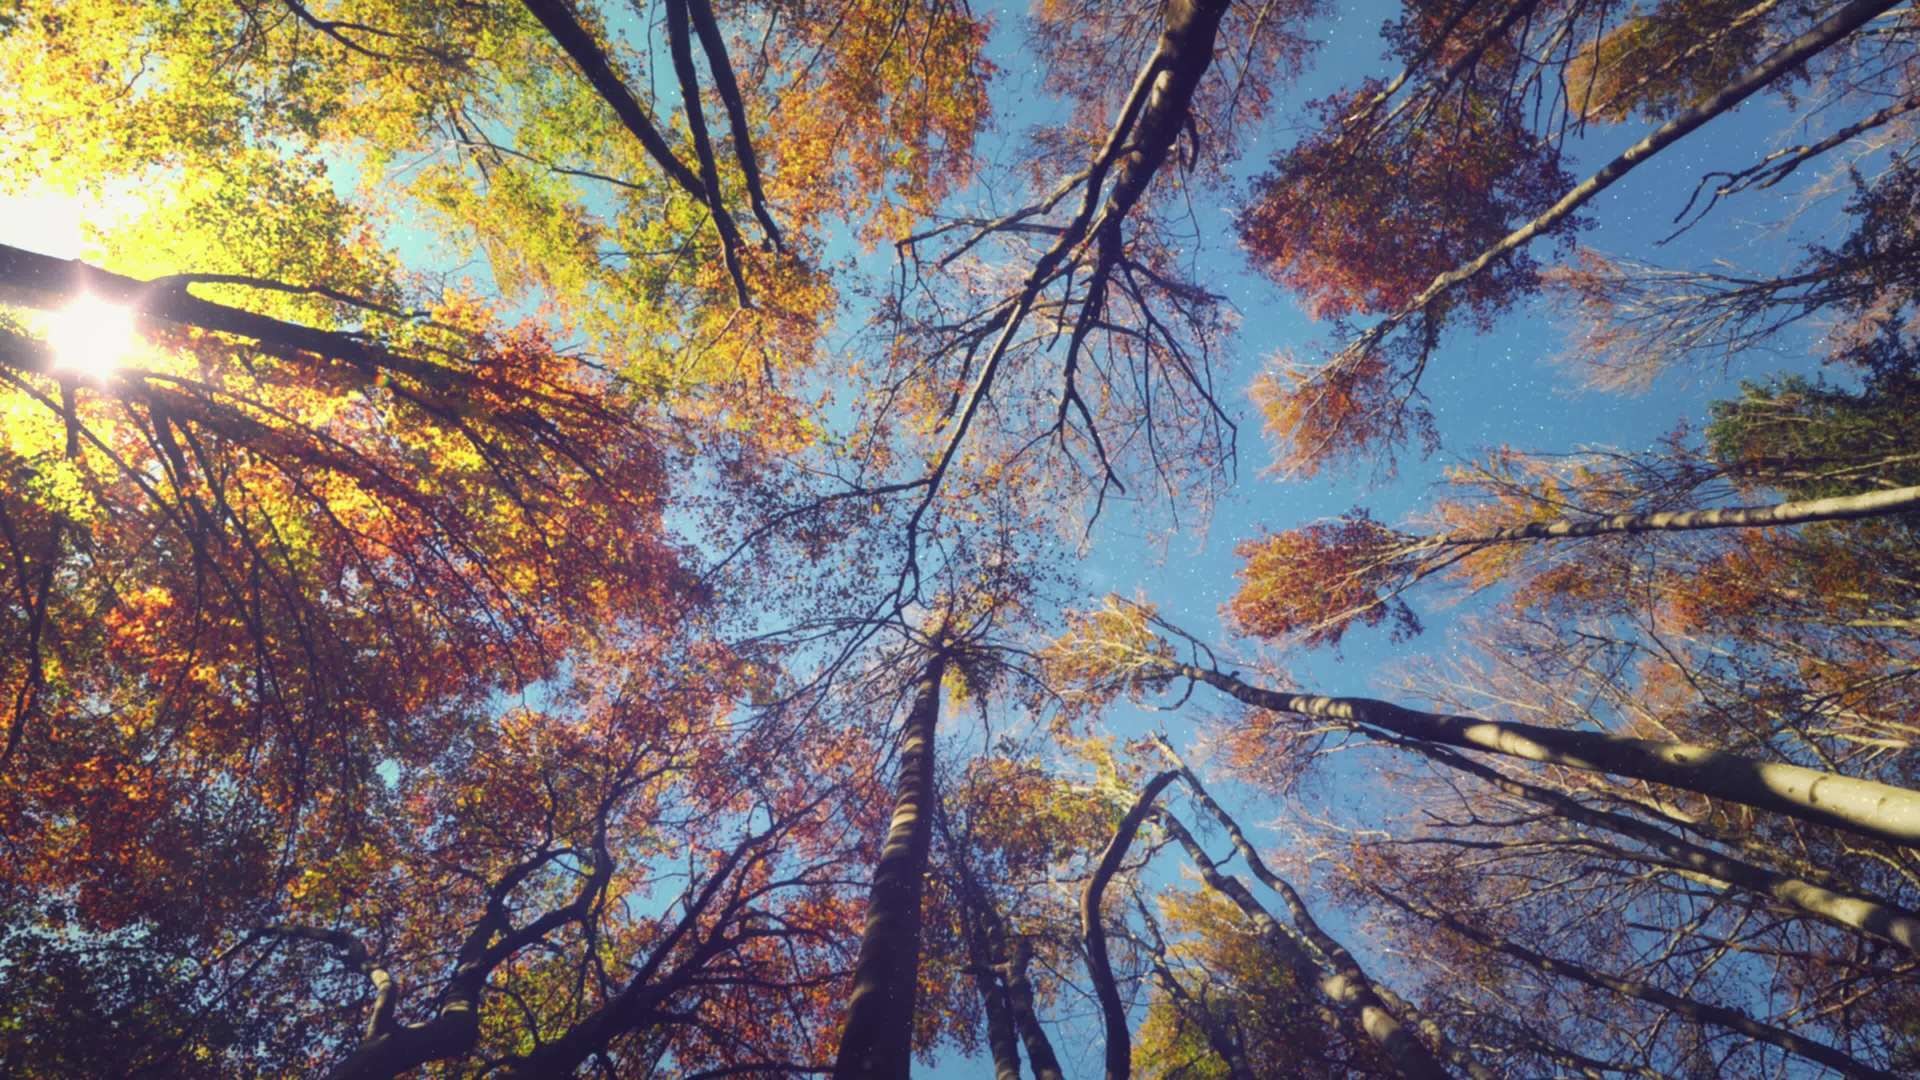 1920x1080 Fall Forest 4K Living Background - Free HD Video Clips & Stock Video  Footage at Videezy!